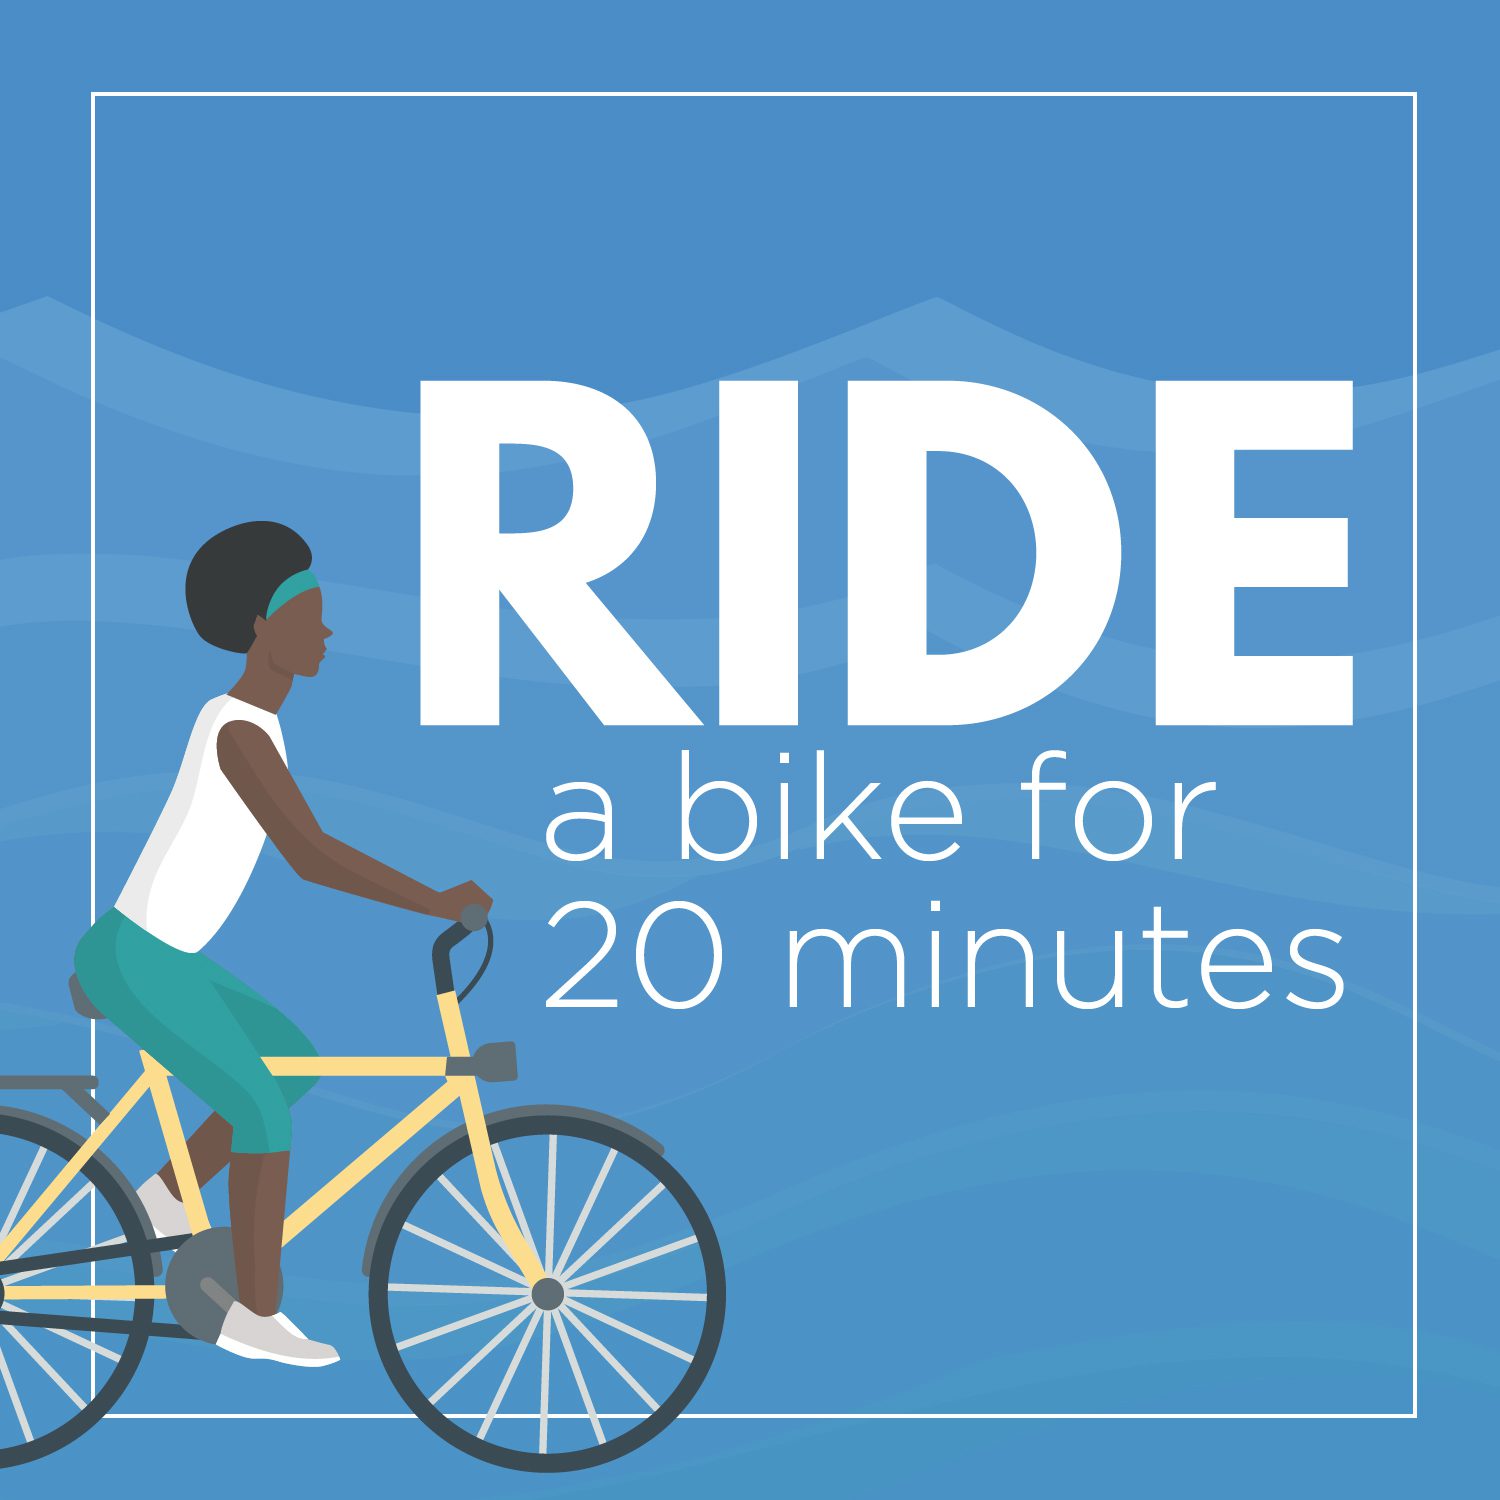 Ride a bike for 20 minutes